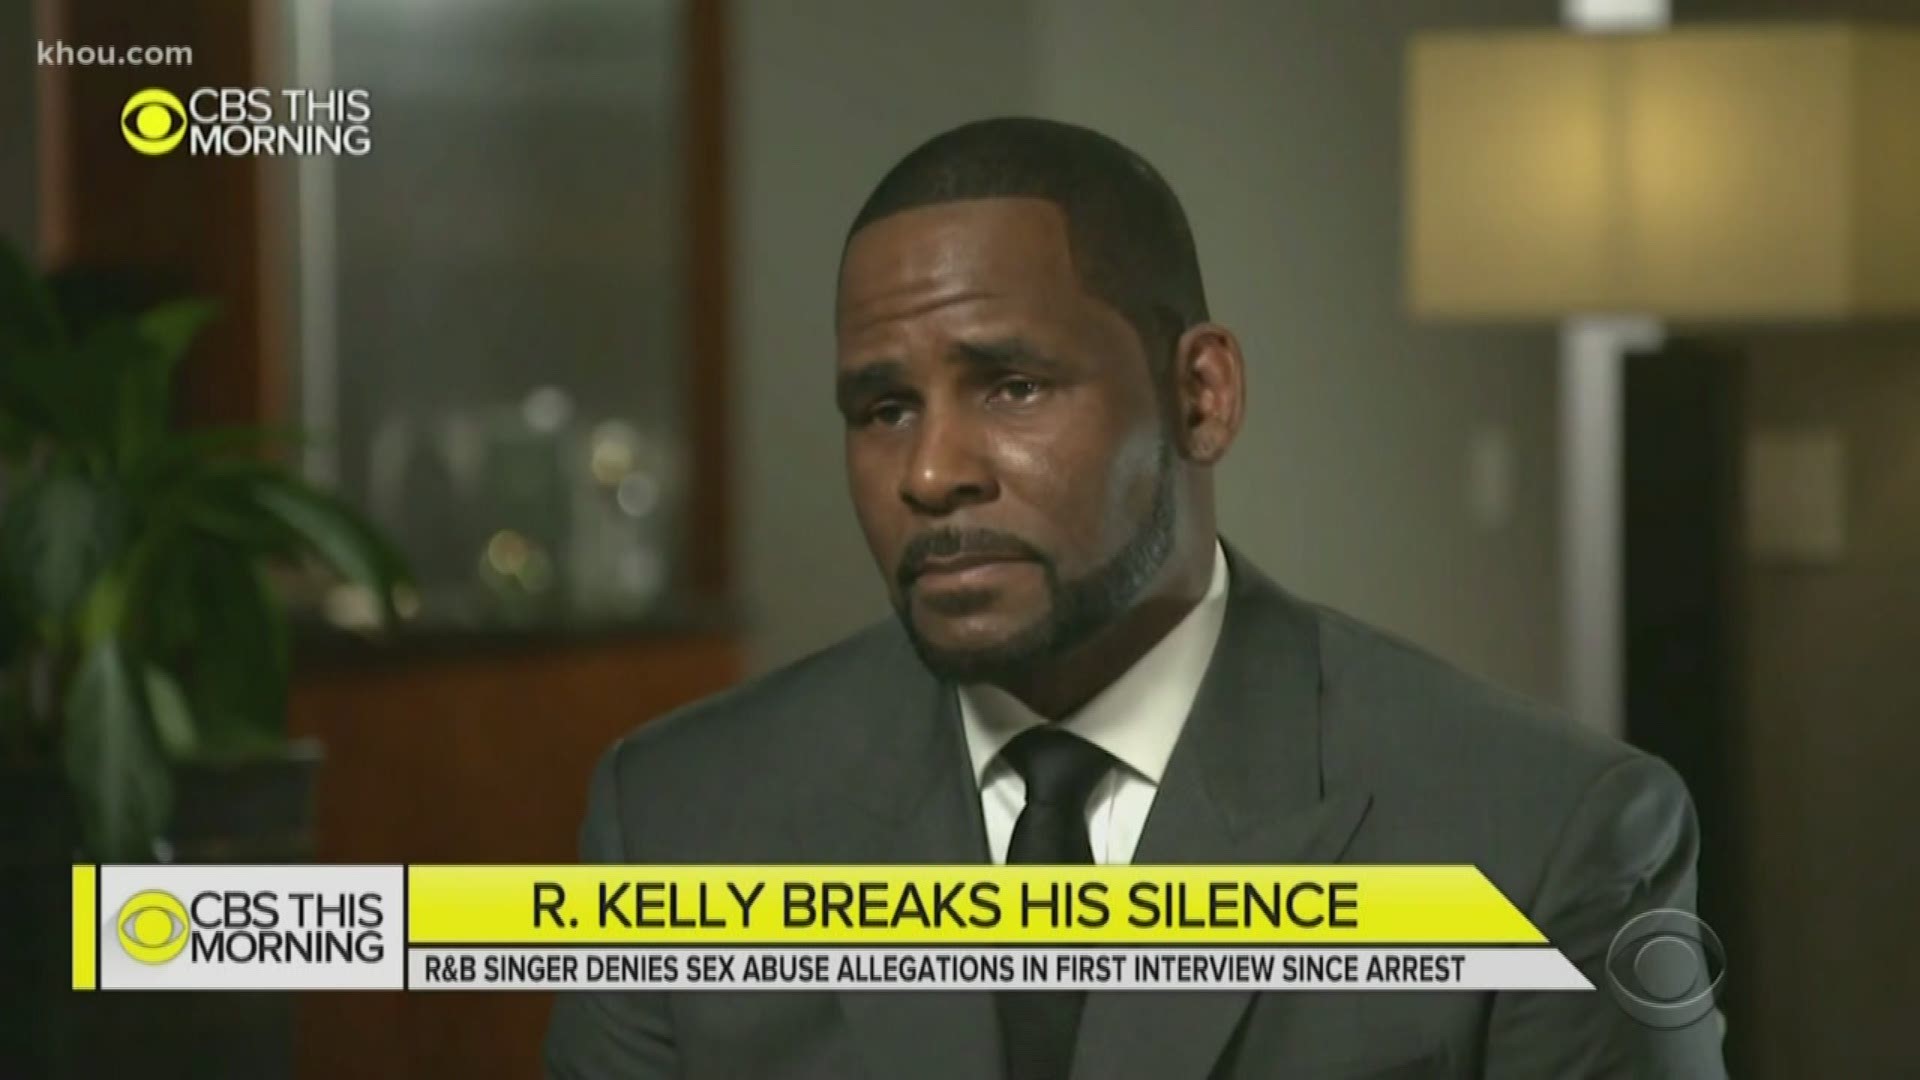 A family escapes a mobile home fire, R. Kelly breaks his silence, the F.D.A. has a warning about makeup sold at Claire's, these are some of the top headlines from #HTownRush at 6:30 a.m.